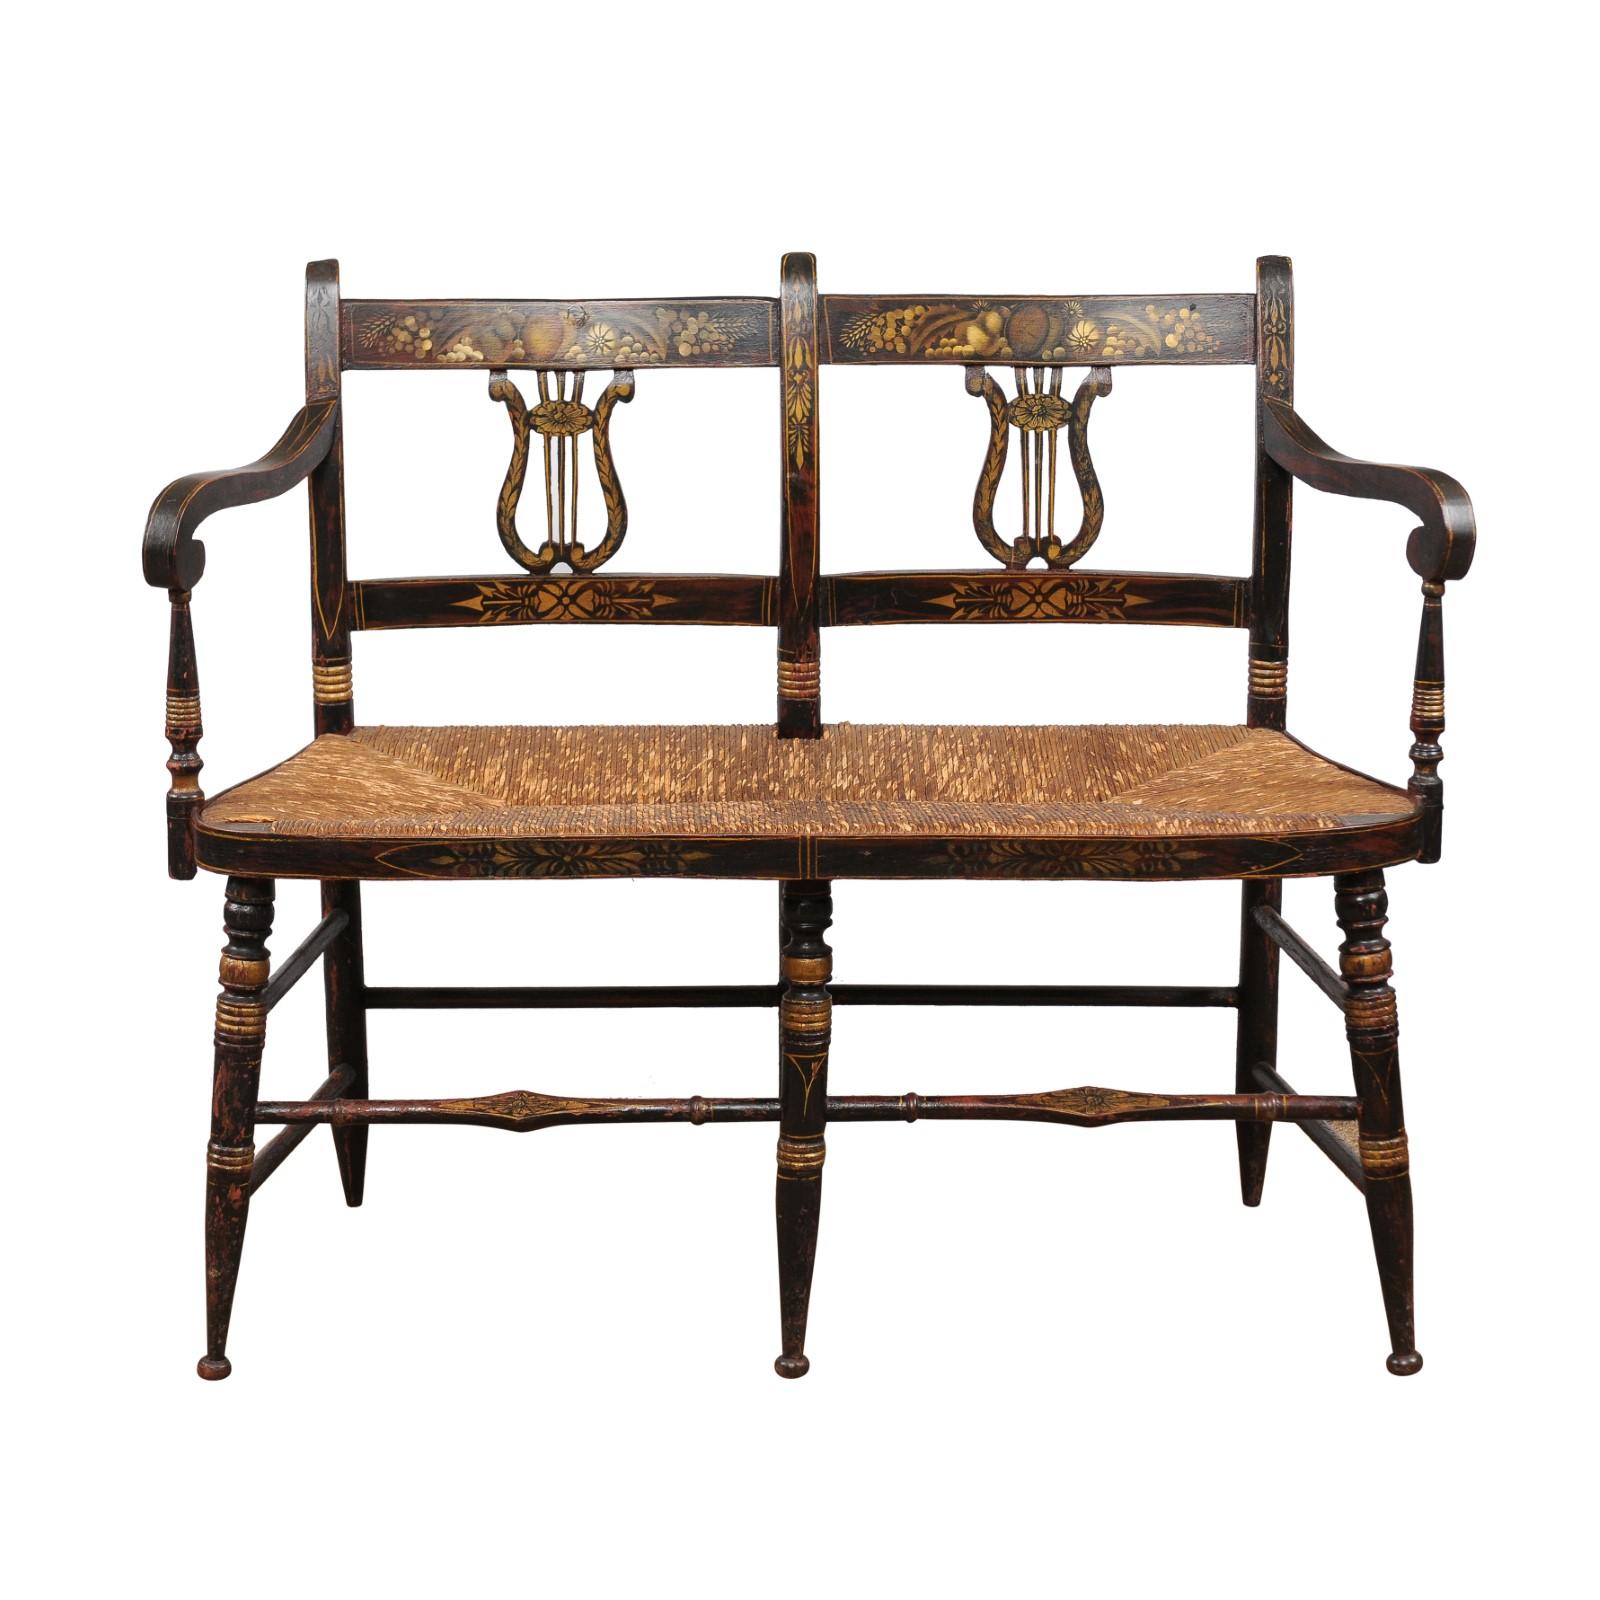 Early 19th Century Black Painted Bench with Lyre-Form Backs-Plats & Rush Seat For Sale